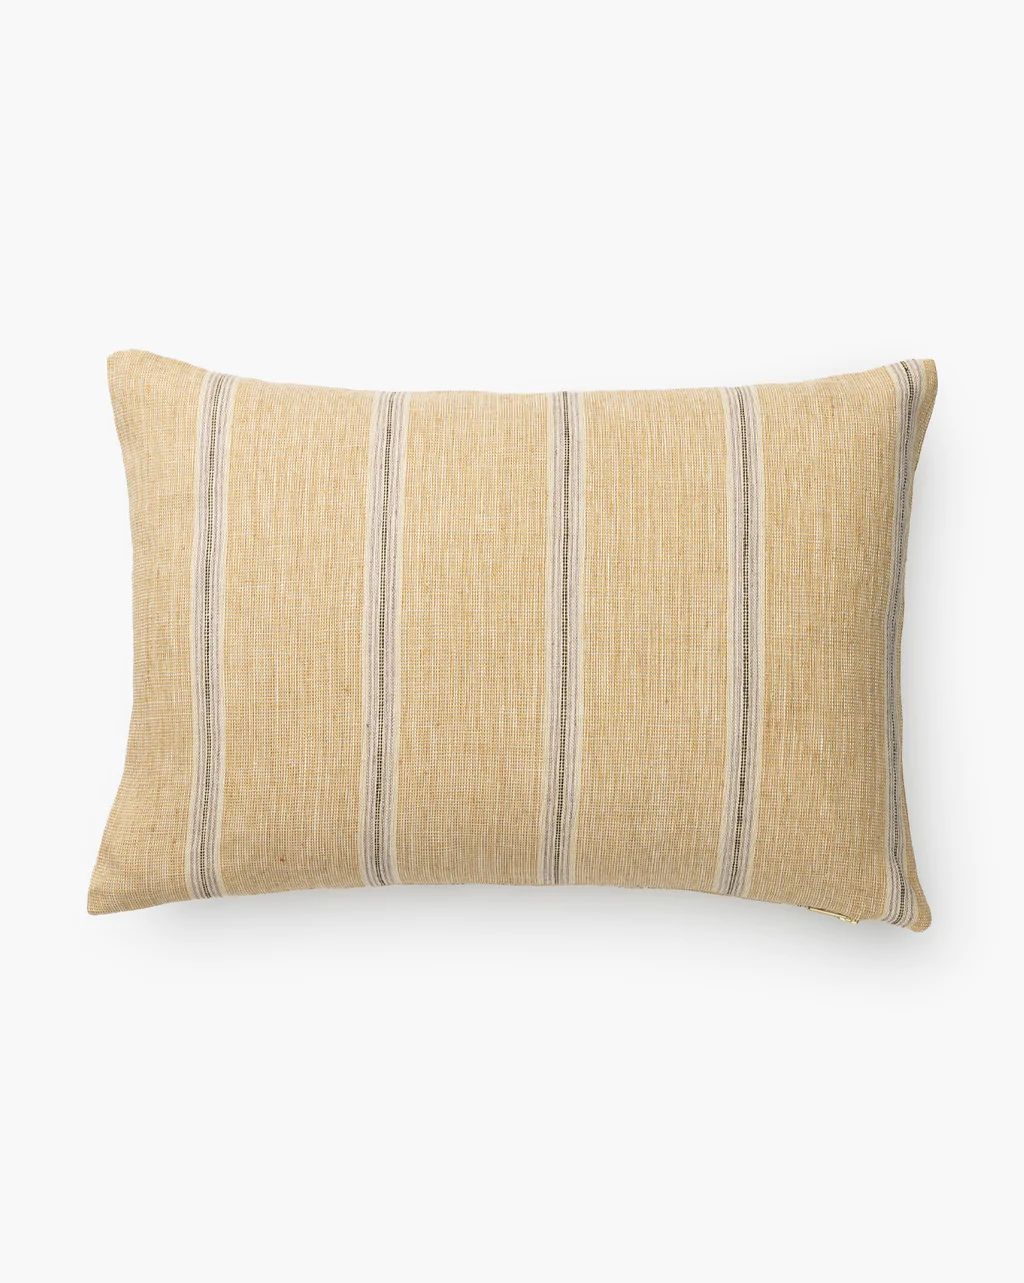 Chatmen Striped Pillow Cover | McGee & Co.